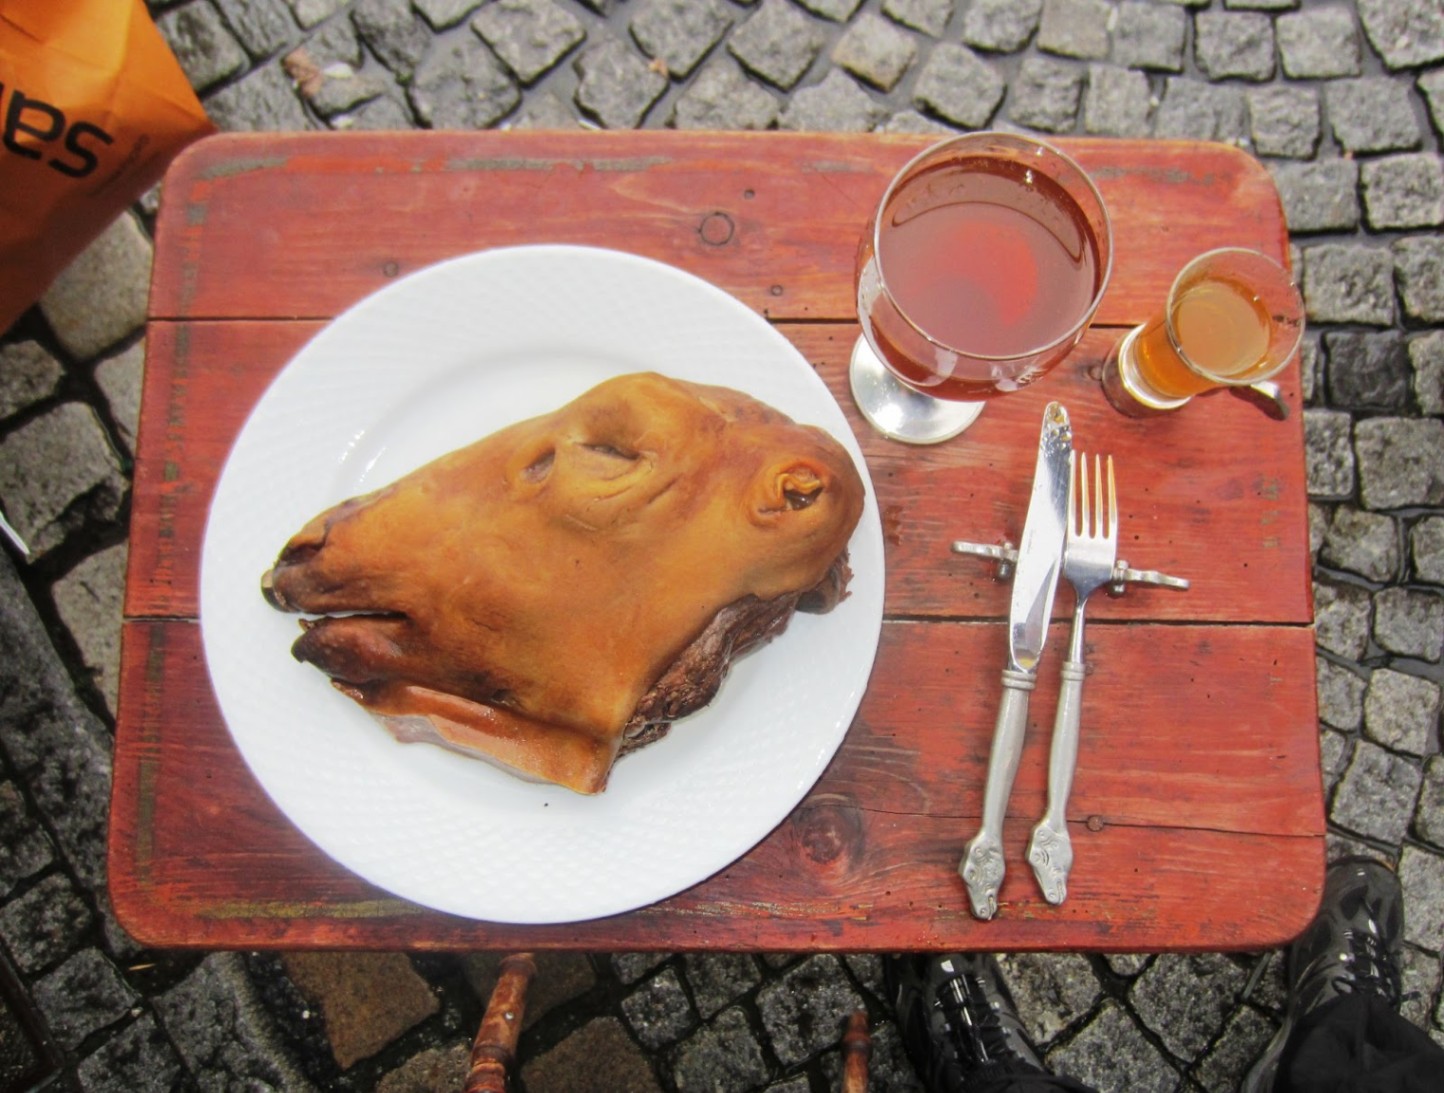 Outrageously Bizarre Foods to Try Around the World